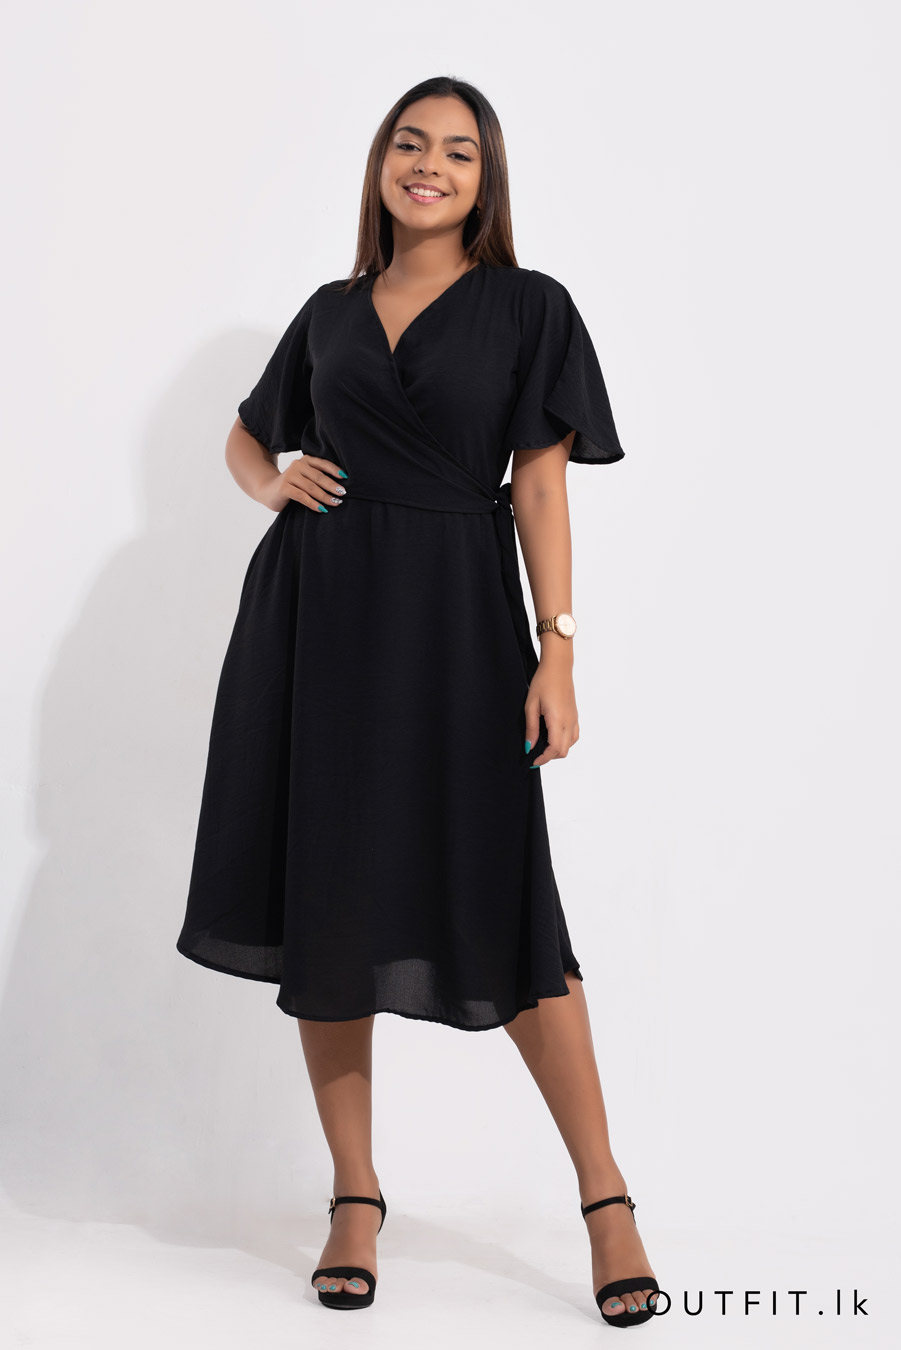 Front cross over midi dress - OUTFIT.lk